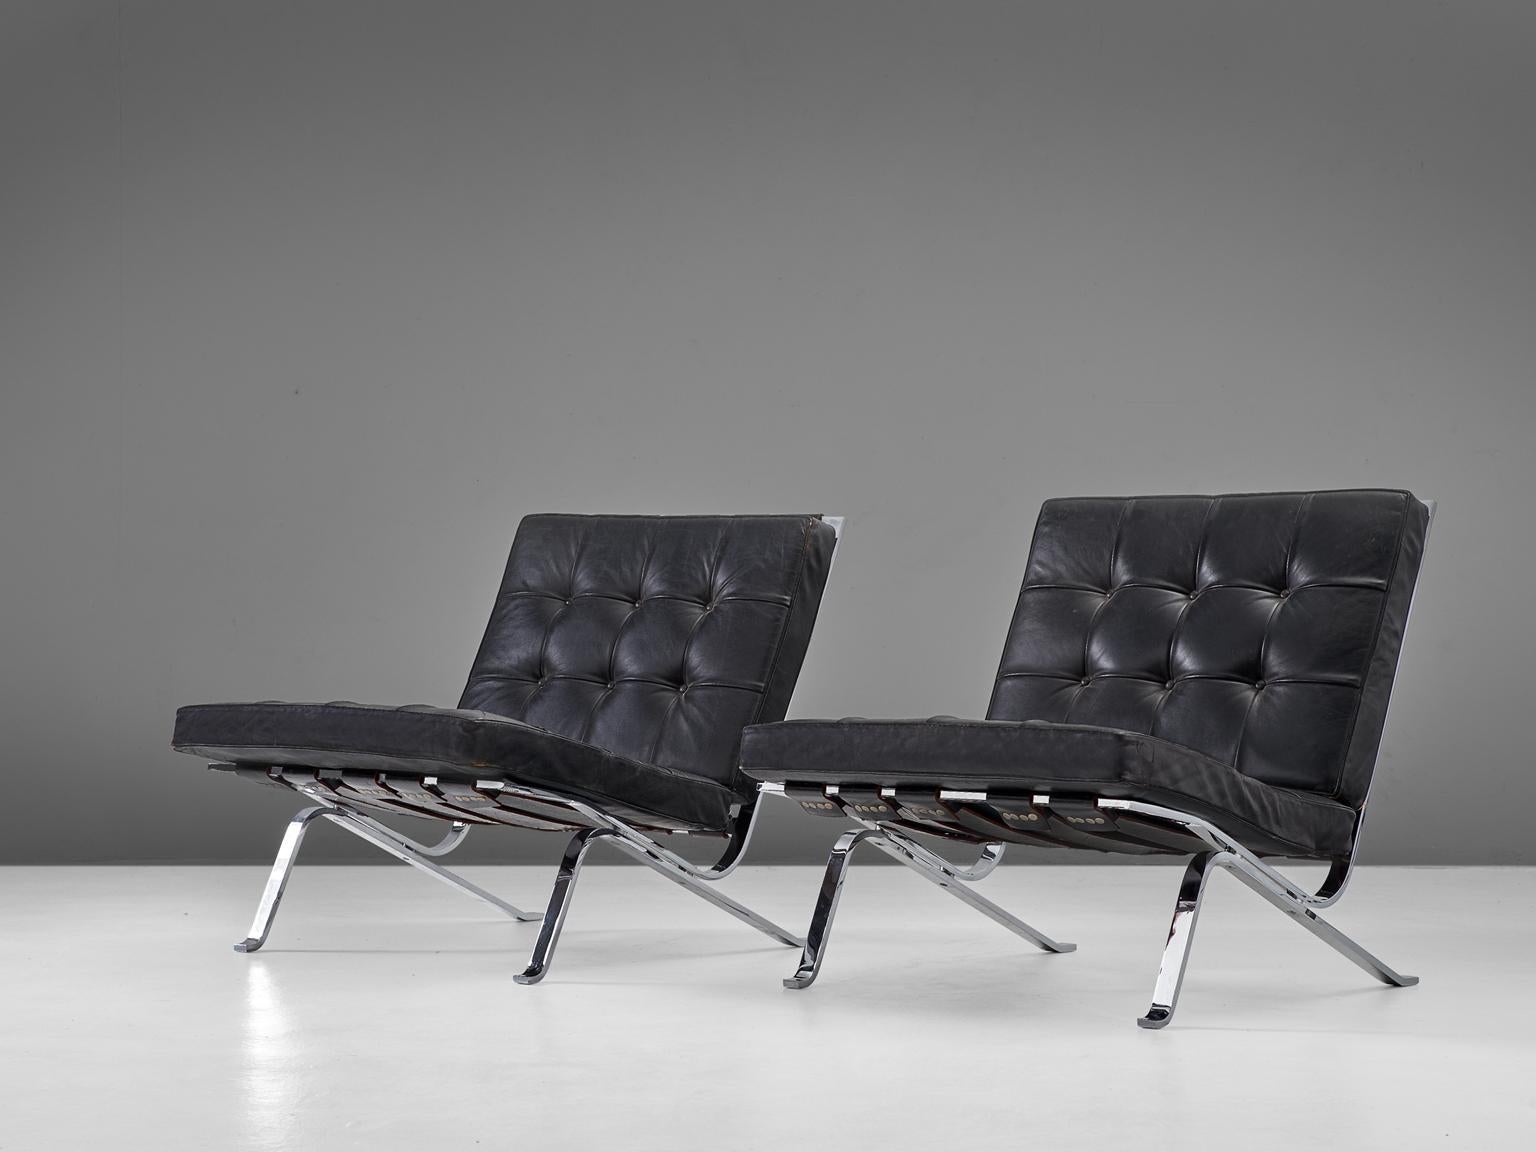 Robert Haussmann, set of two easy chairs model RH301, chromed metal and black leather, Switzerland 1950s. 

A pair of 2 rare and early chairs by Swiss born architect Robert Haussmann. This chair was an homage by Haussmann to his idol and iconic